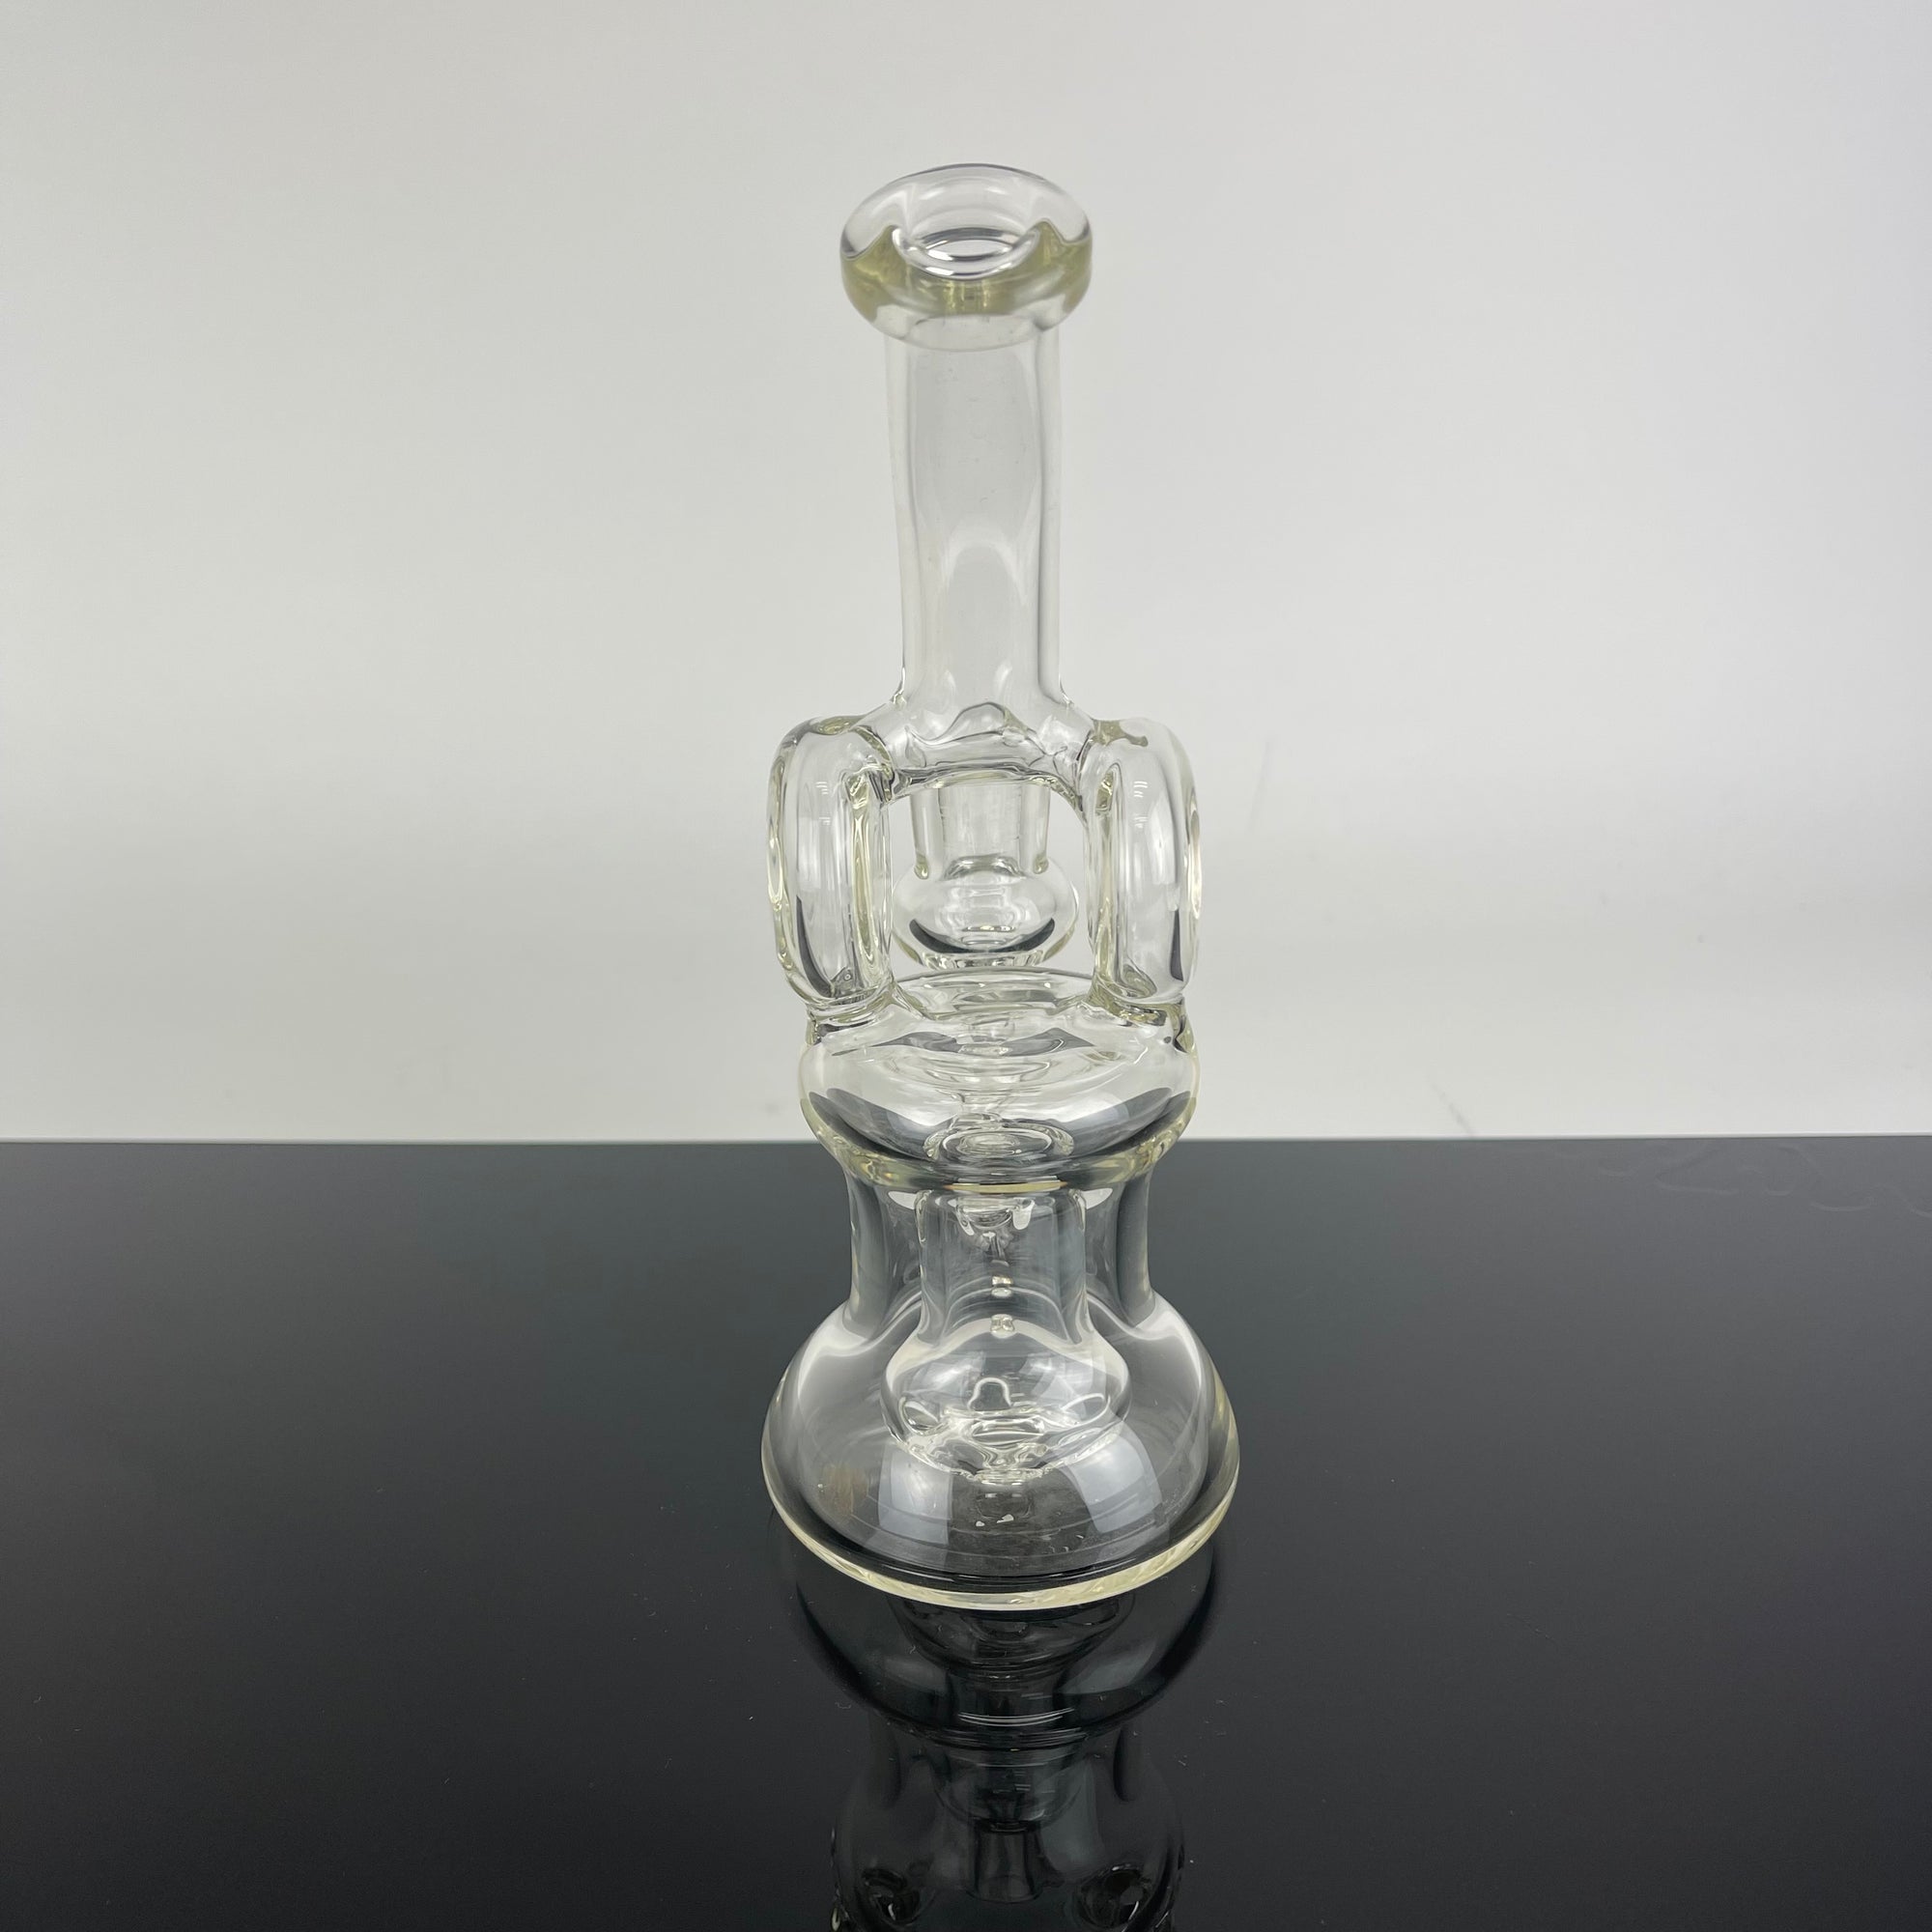 Glass by Mouse Dual Uptake Rig